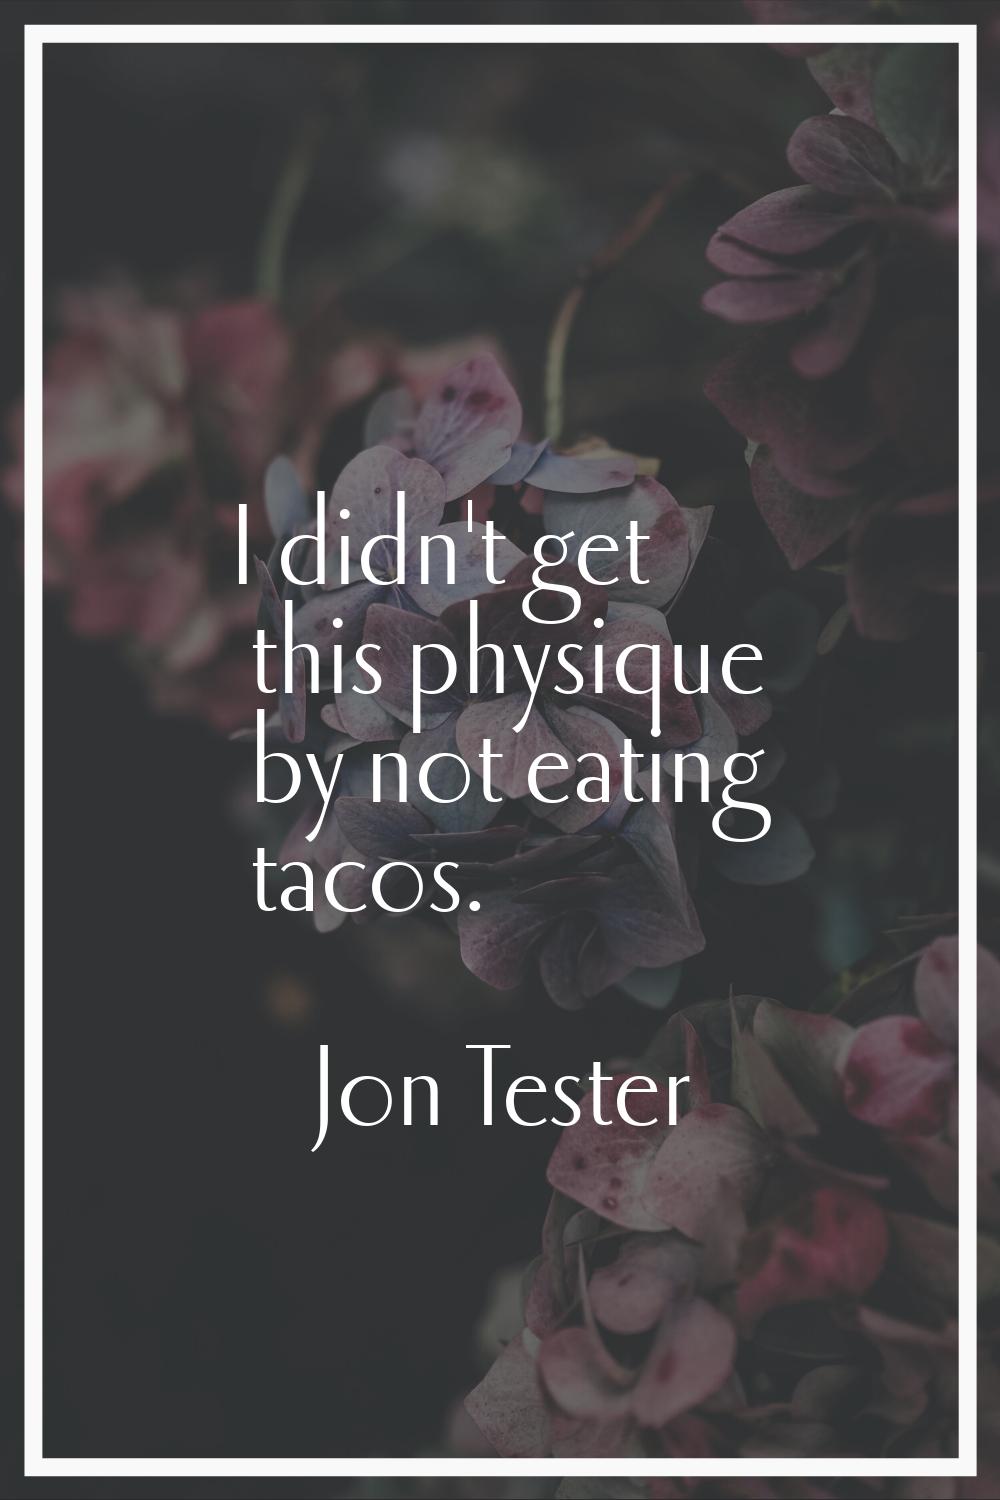 I didn't get this physique by not eating tacos.